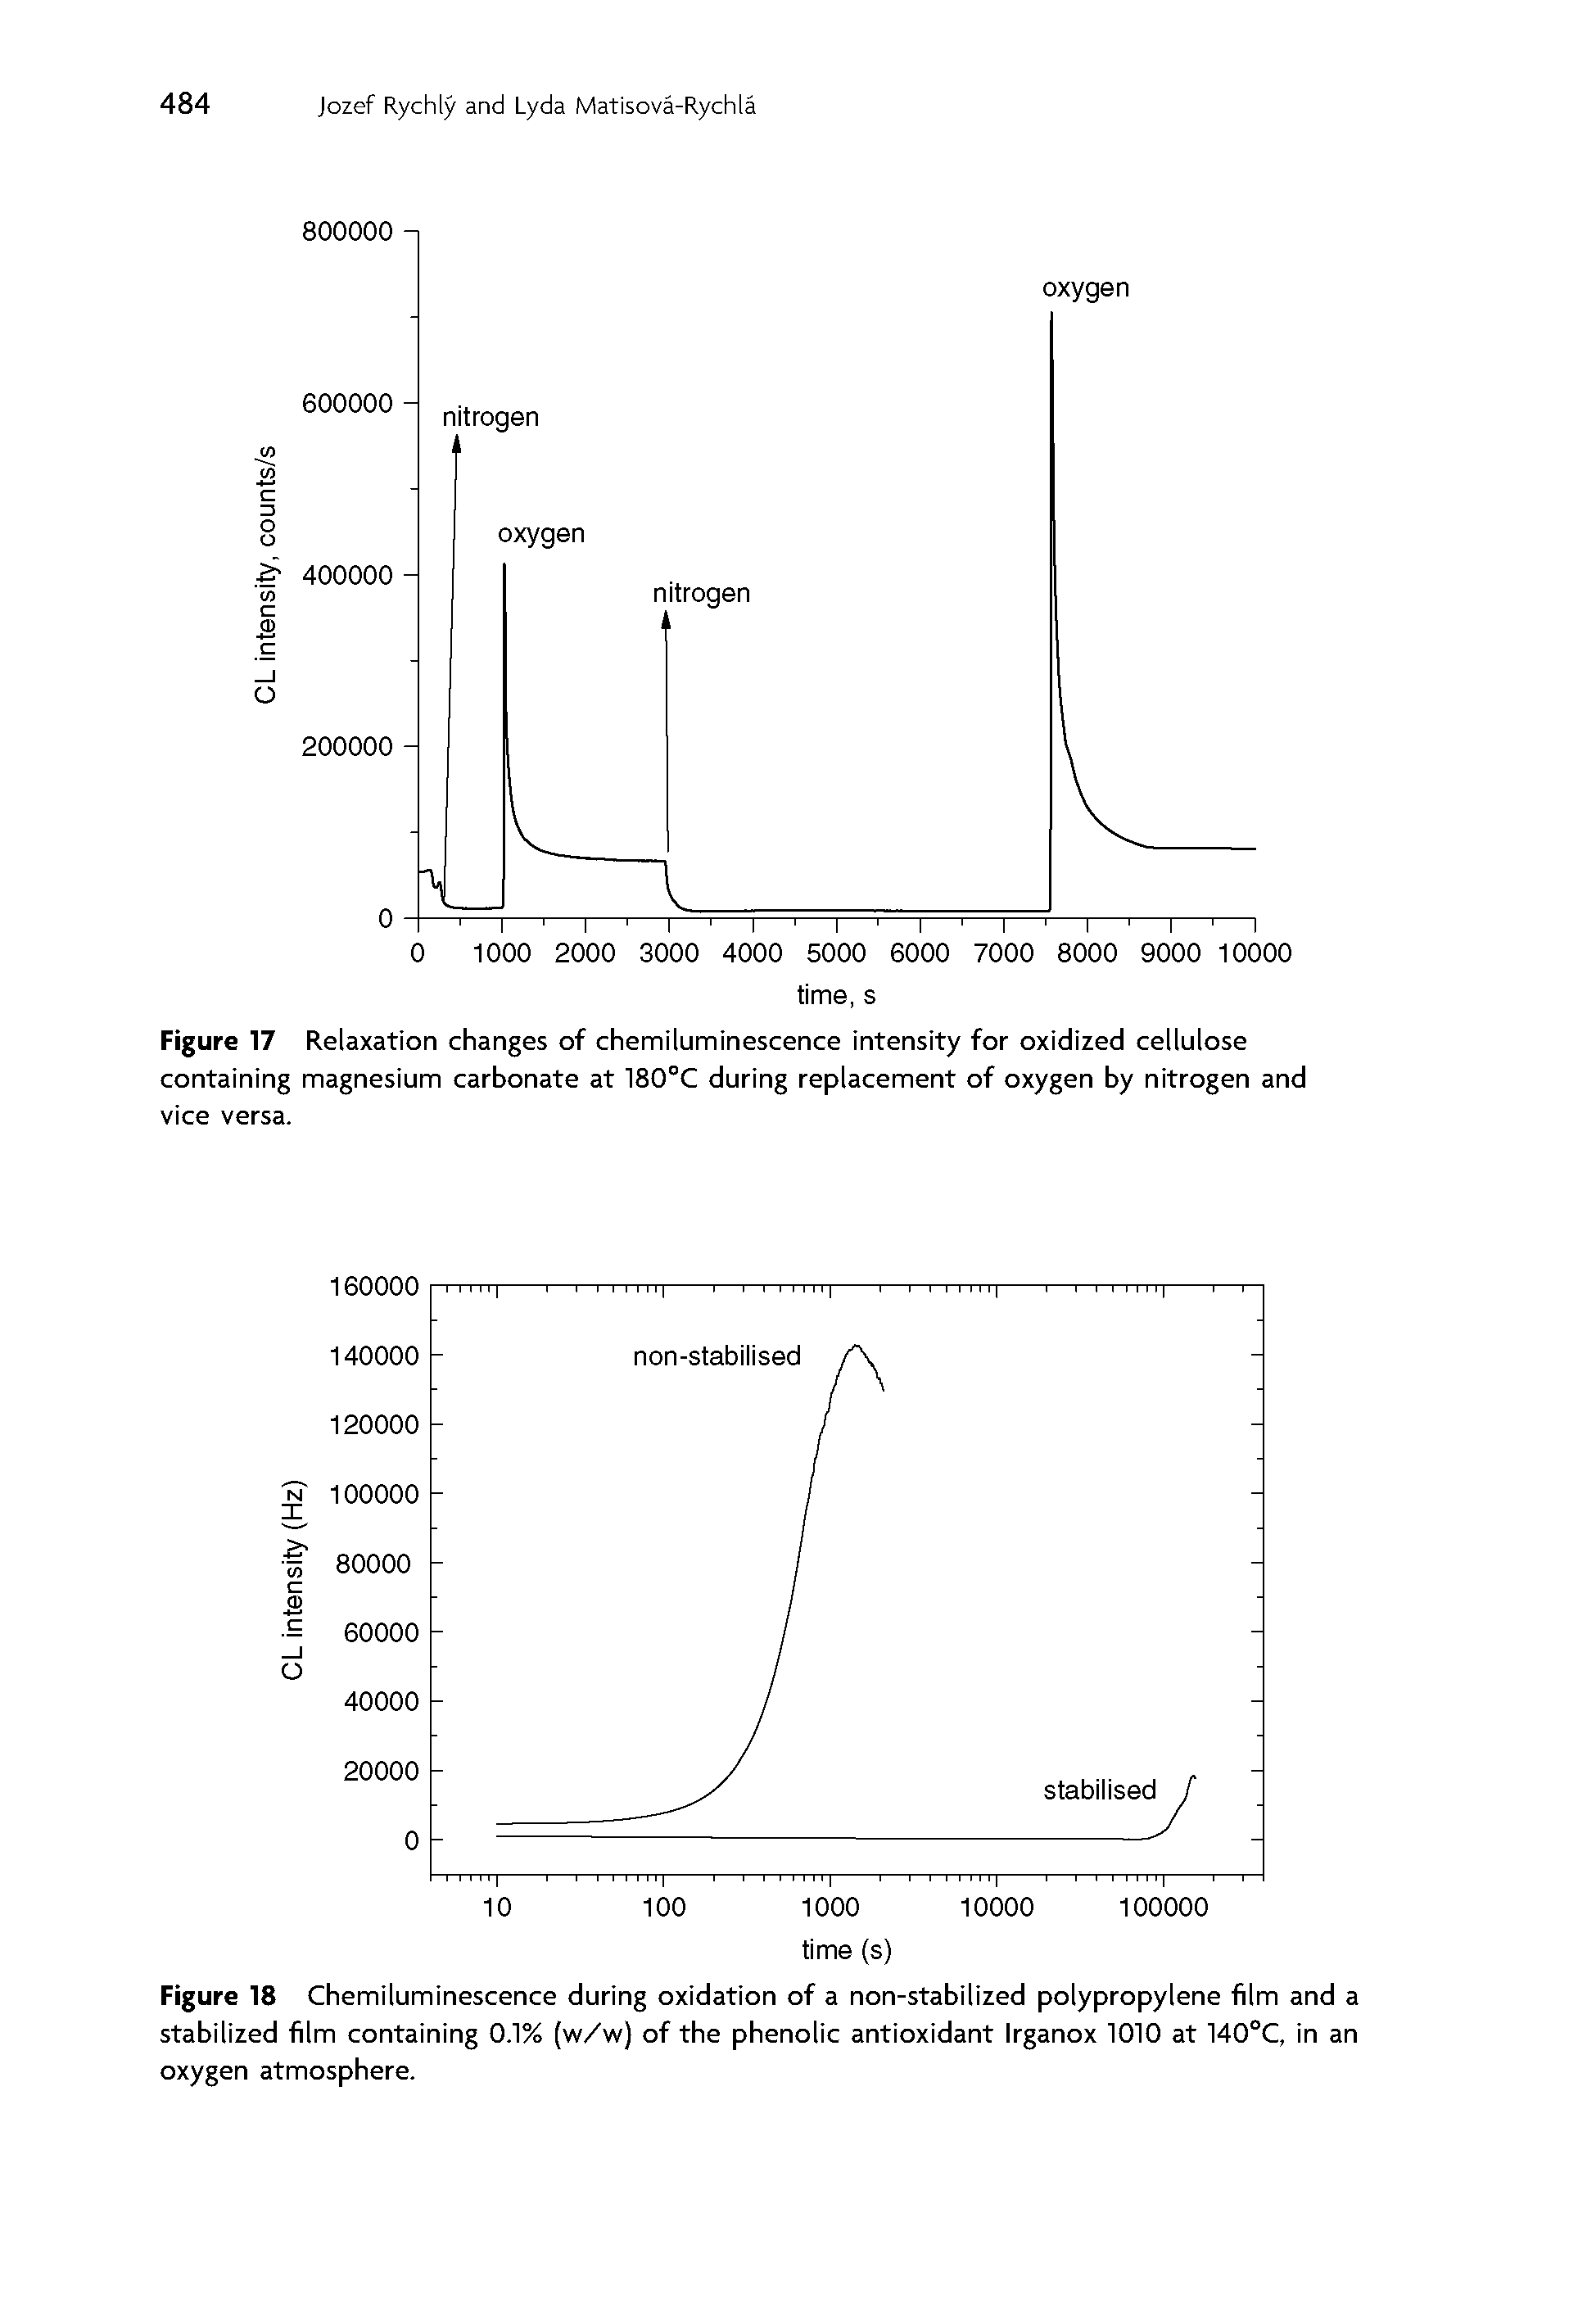 Figure 17 Relaxation changes of chemiluminescence intensity for oxidized cellulose containing magnesium carbonate at 180°C during replacement of oxygen by nitrogen and vice versa.